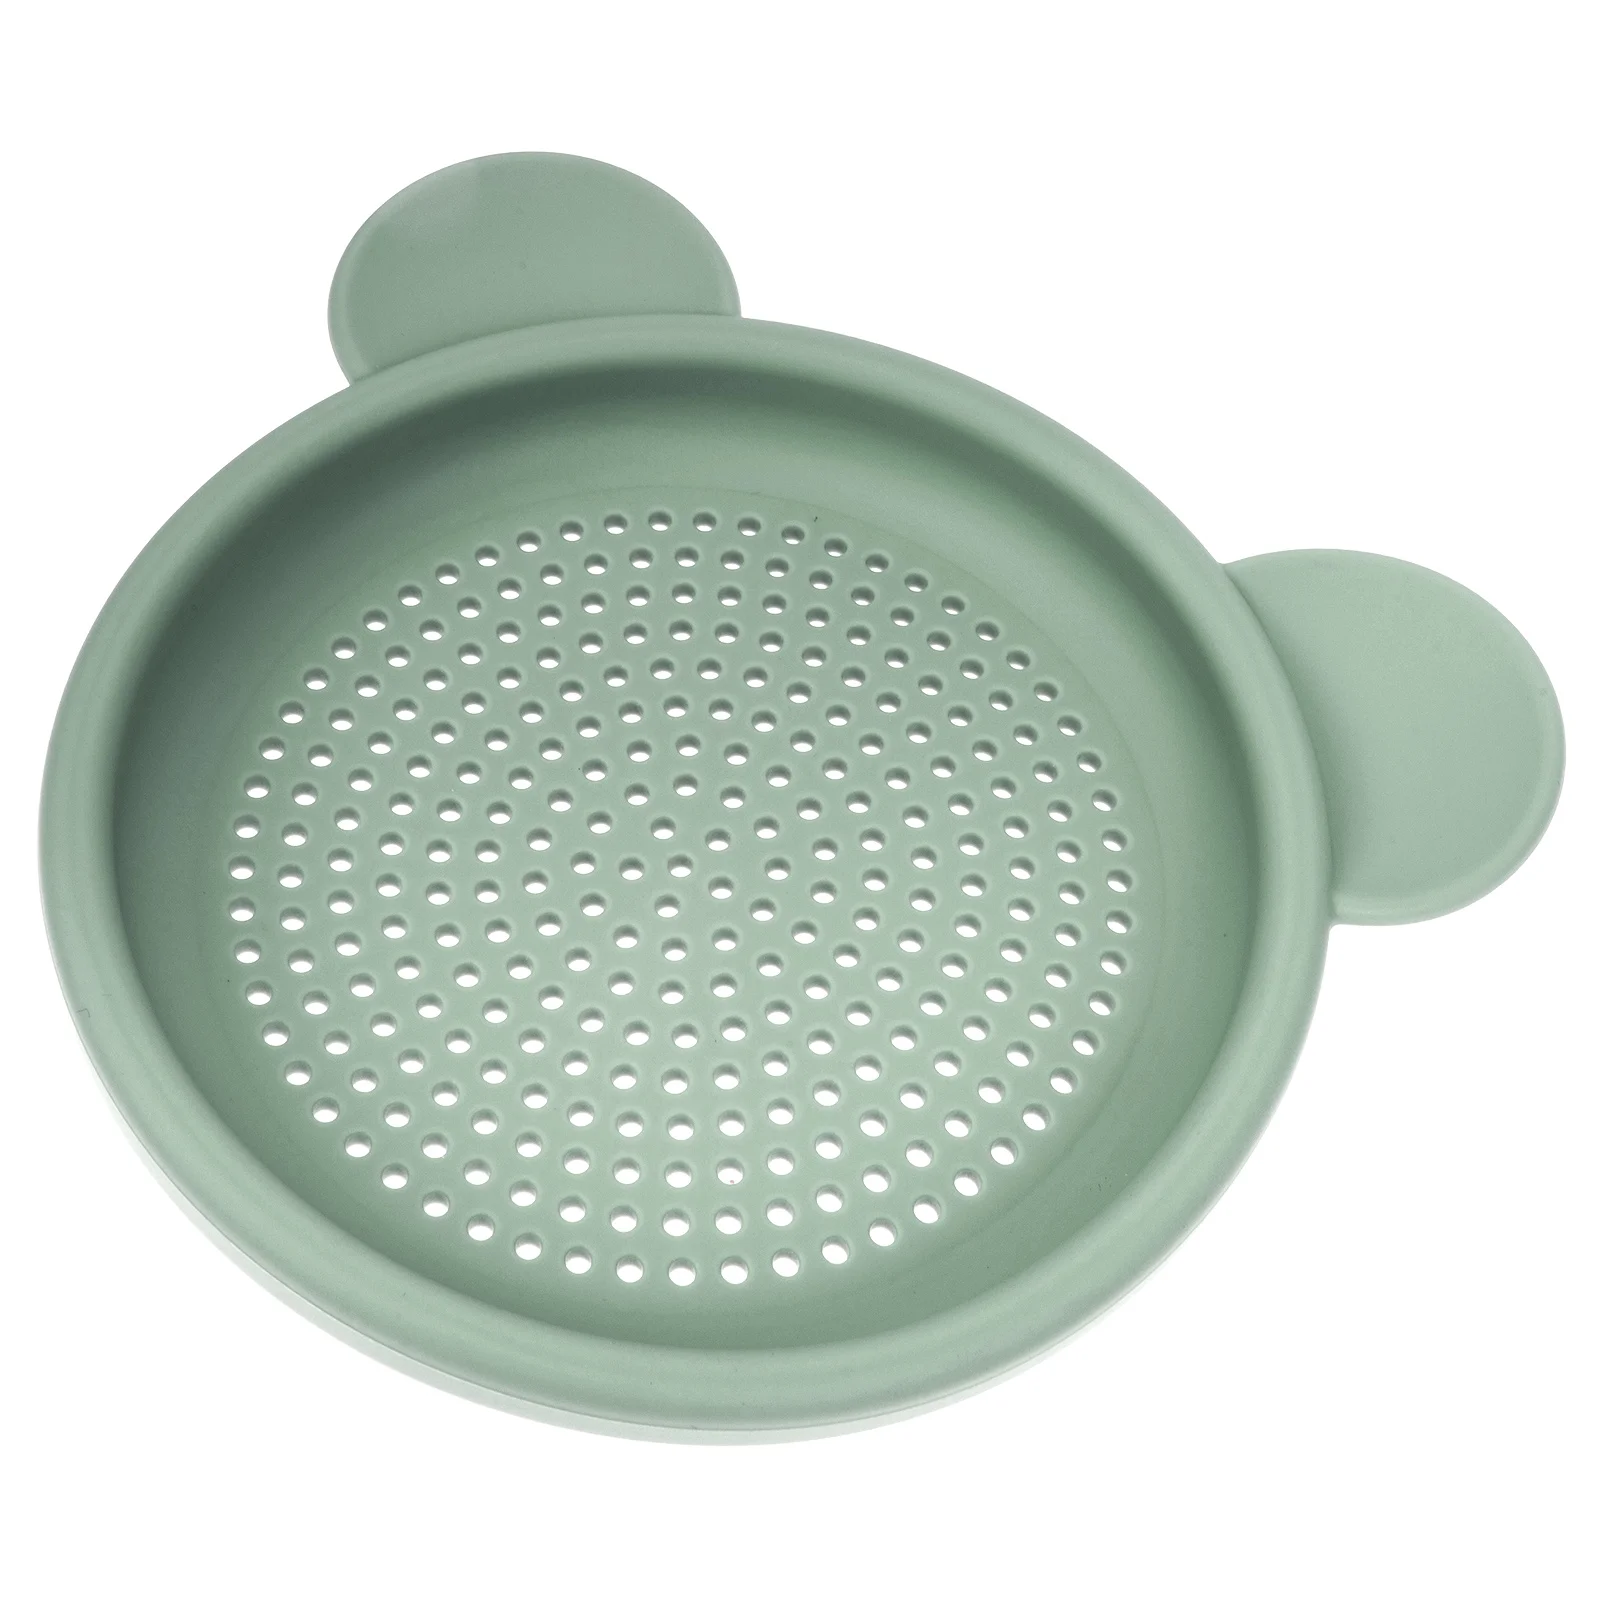 

Sand Sifter Sieves Silicone Sieve Strainer Garden Sieve Soil Sifter Beach Sand Shell Sifter Pan Sand Strainer Toys for Backyard